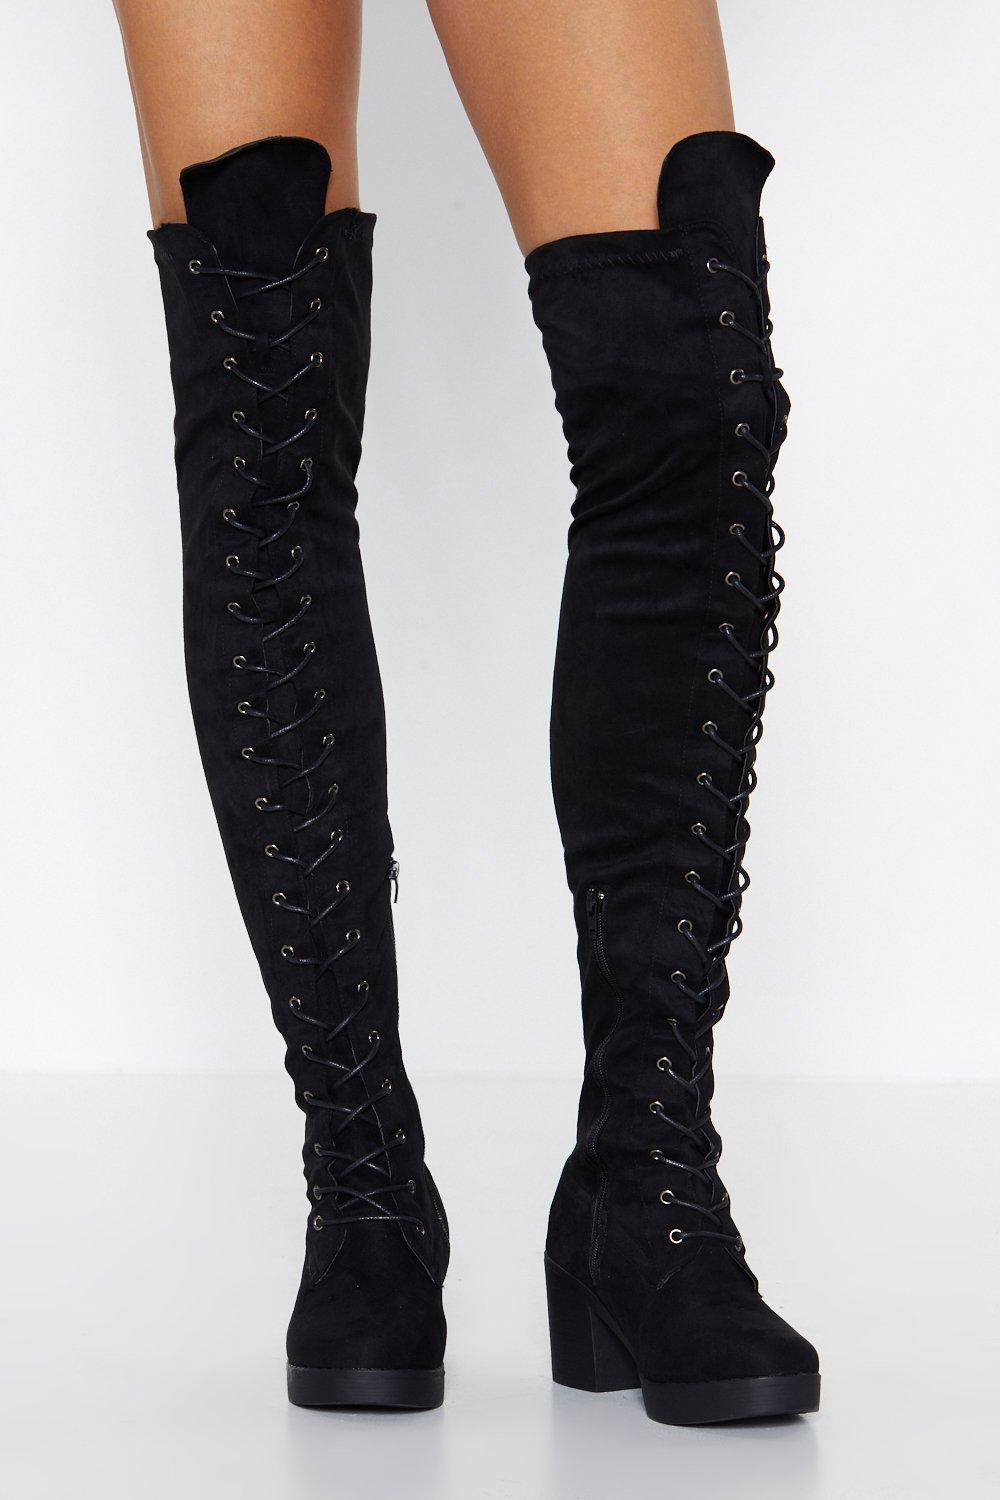 https://media.nastygal.com/i/nastygal/agg81994_black_xl_1/black-lace-up-over-the-knee-boots